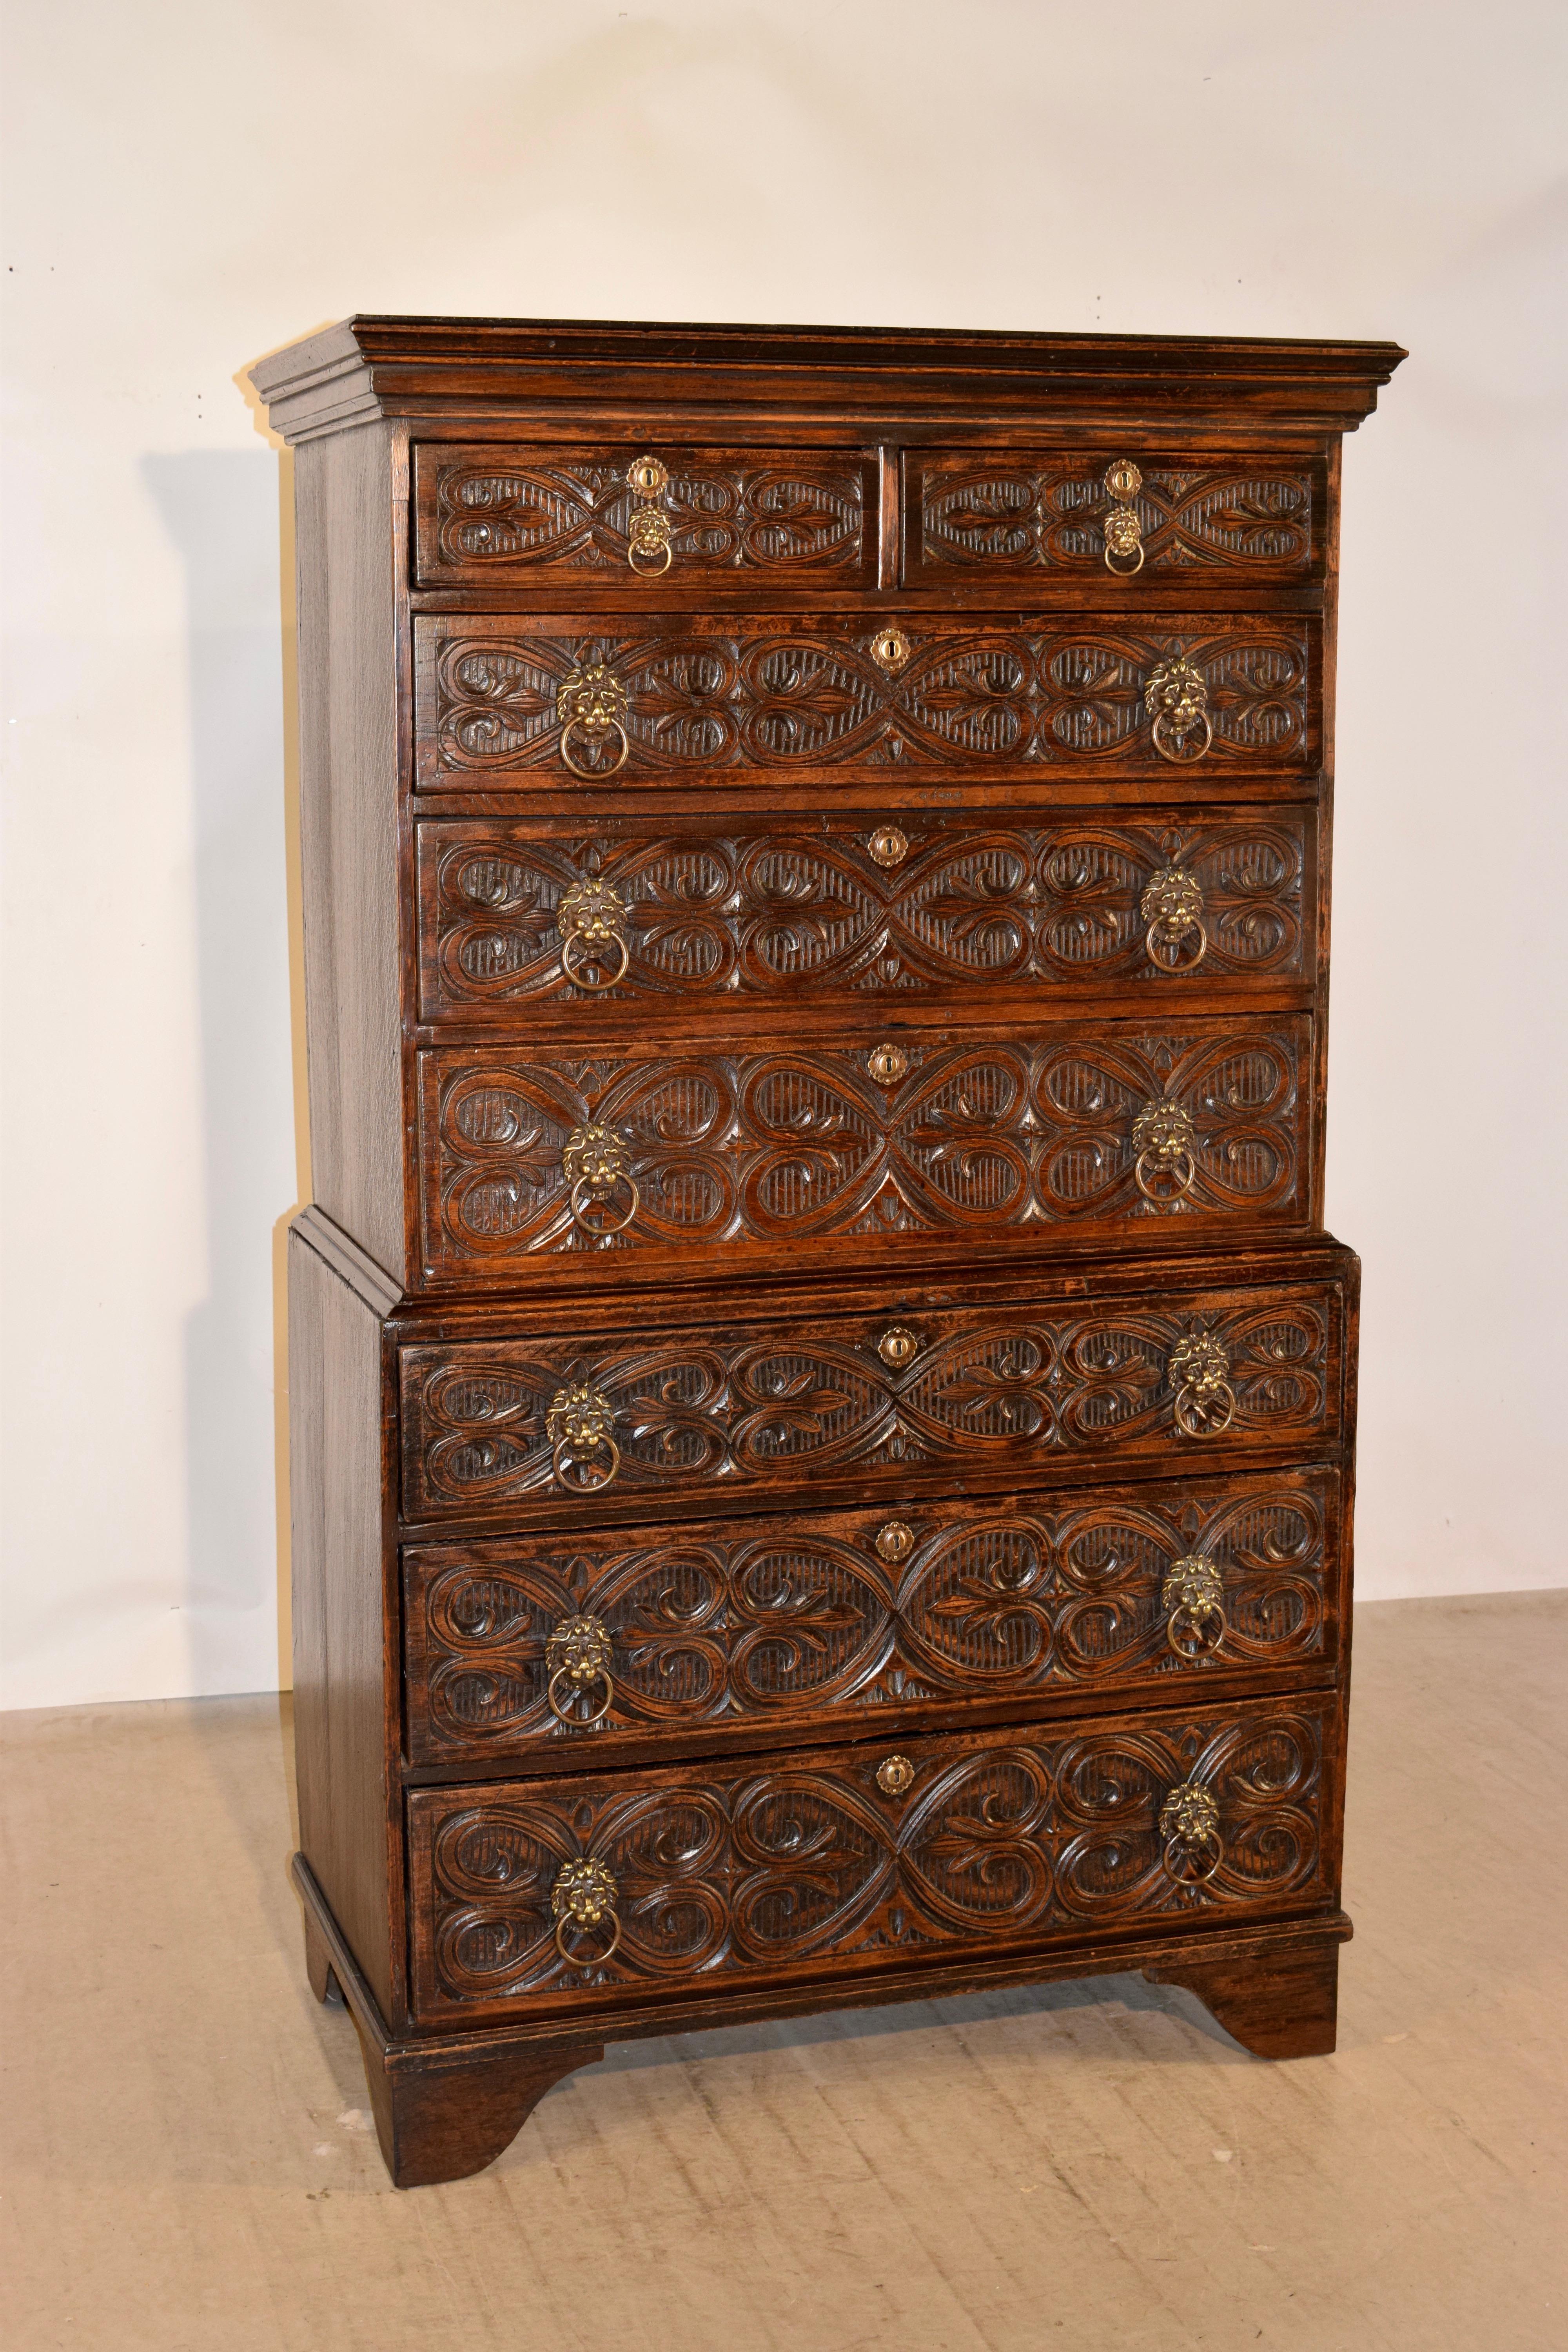 18th century English oak chest on chest with lovely crown molding around the top, following down to a two-piece case which has two drawers over six drawers. The drawers fronts are all hand carved decorated and have the most wonderfully hand cast